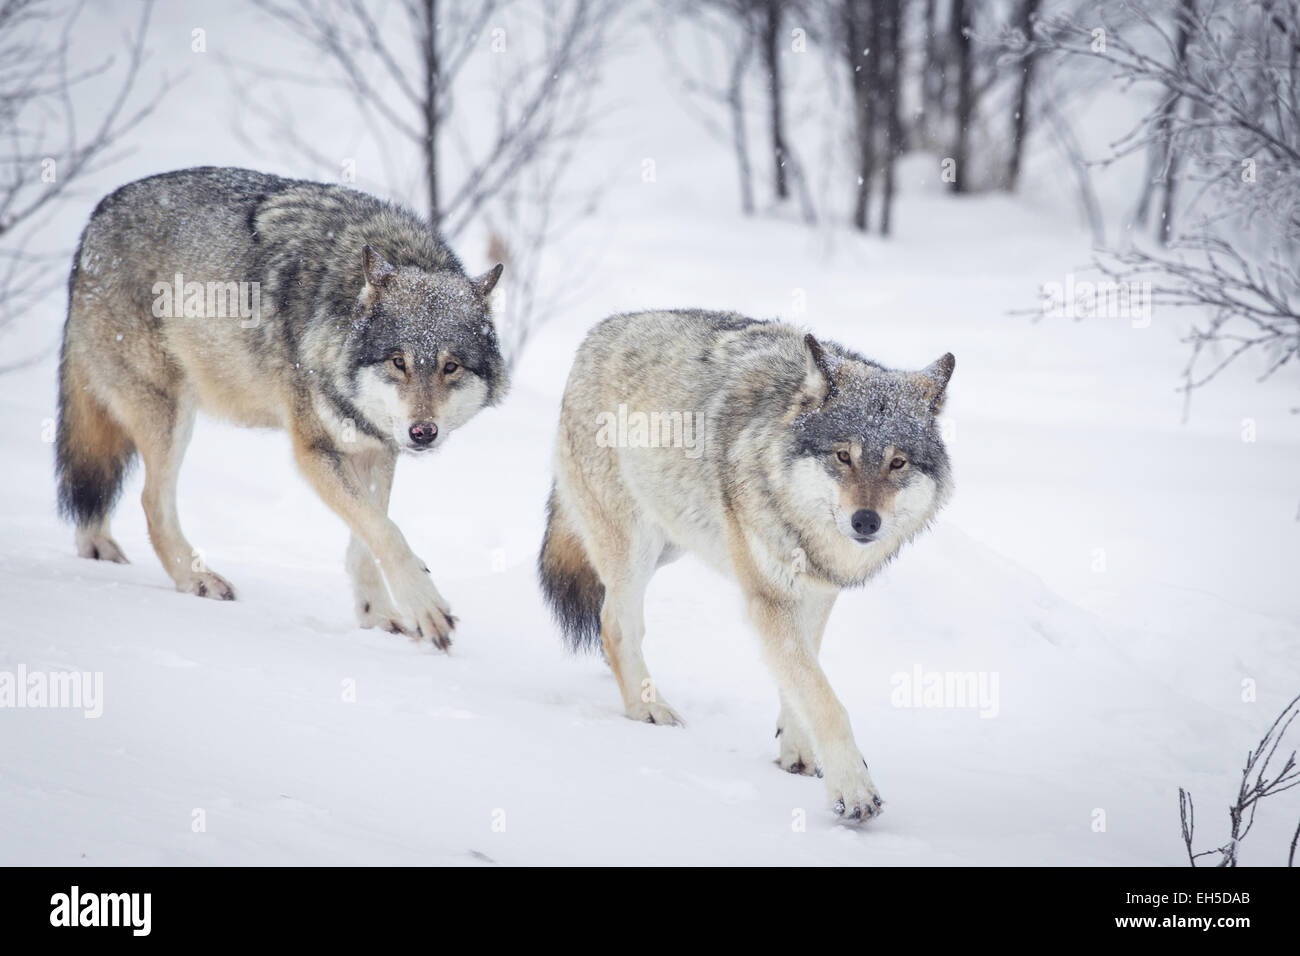 Wolf in a norwegian winter forest. Snowing. Stock Photo